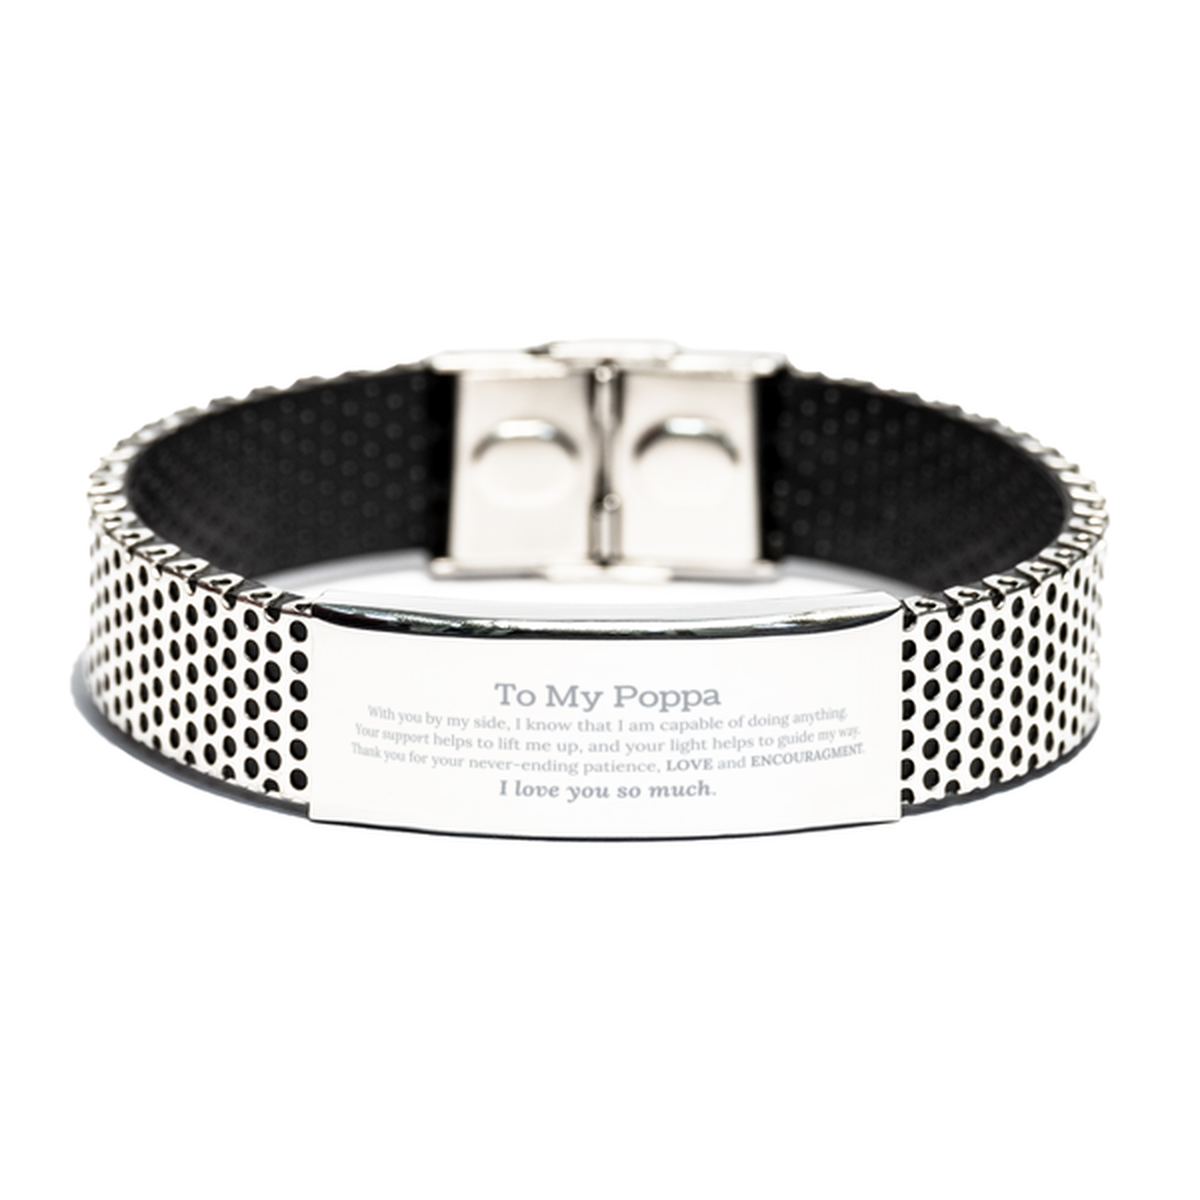 Appreciation Poppa Stainless Steel Bracelet Gifts, To My Poppa Birthday Christmas Wedding Keepsake Gifts for Poppa With you by my side, I know that I am capable of doing anything. I love you so much